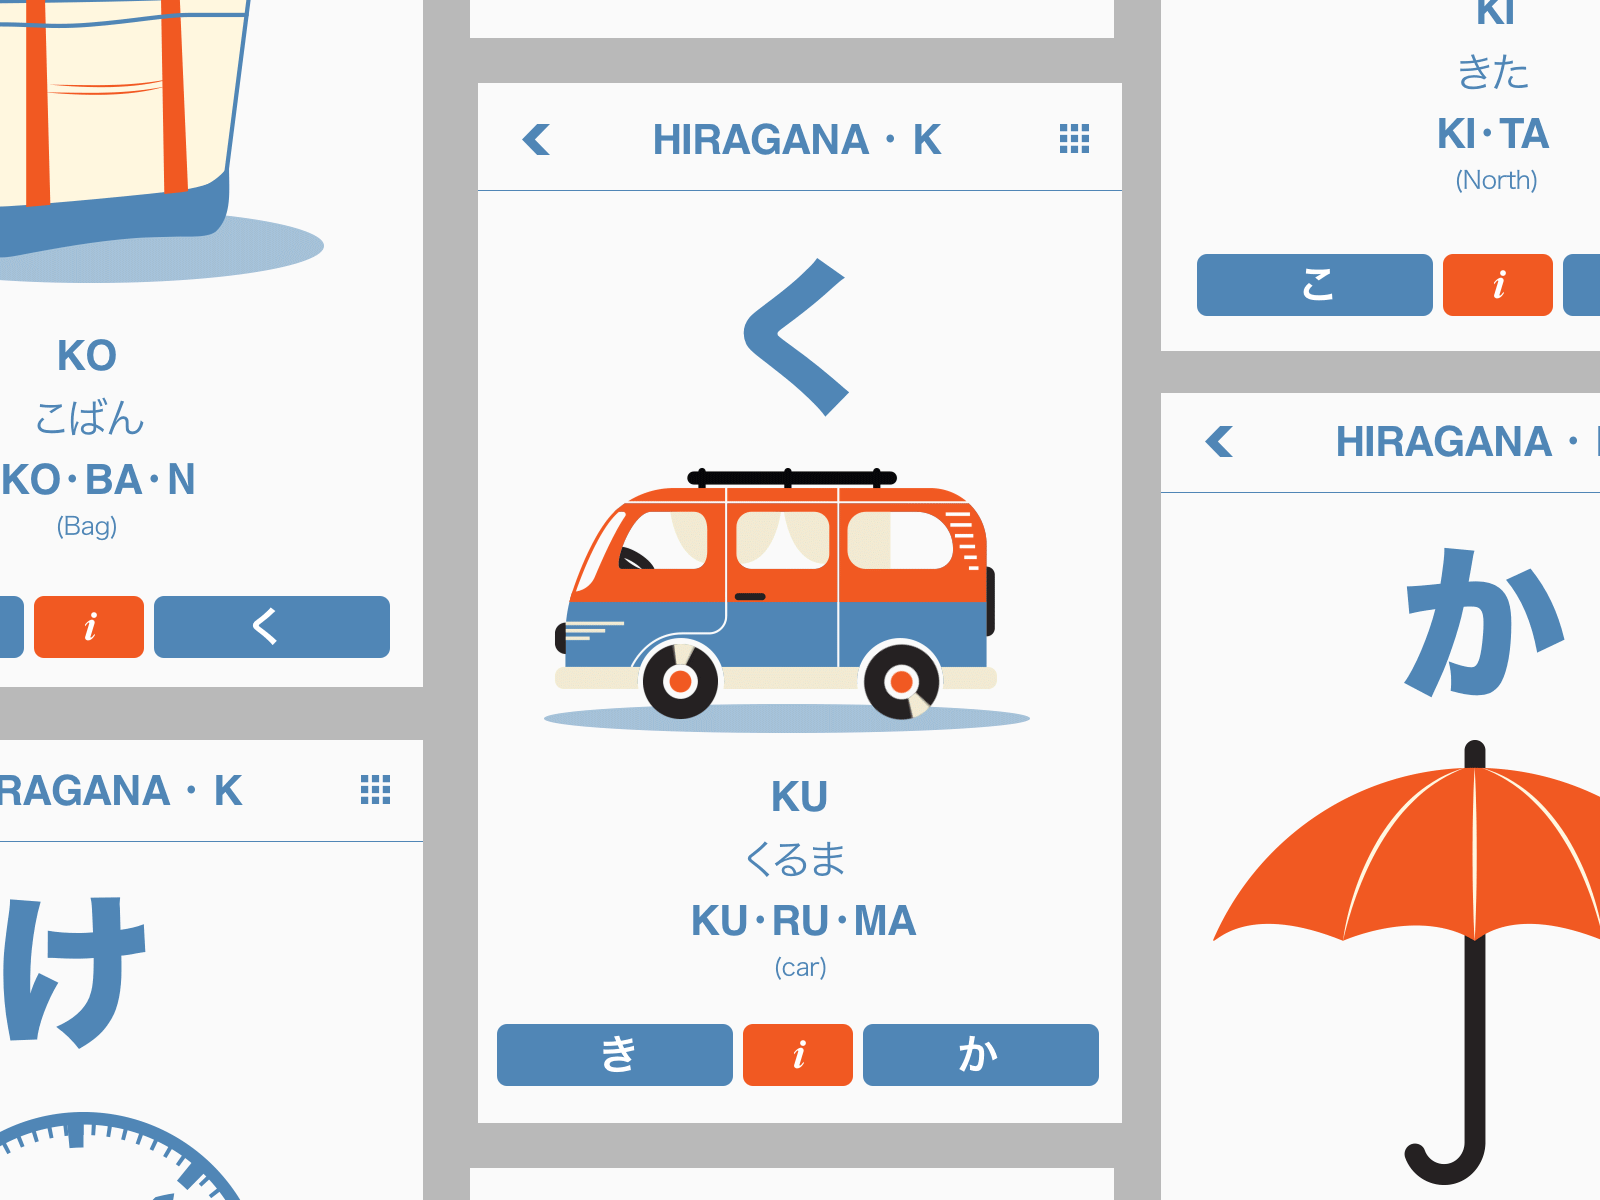 App screen mockup for a language learning app. Main screen showing a moving van